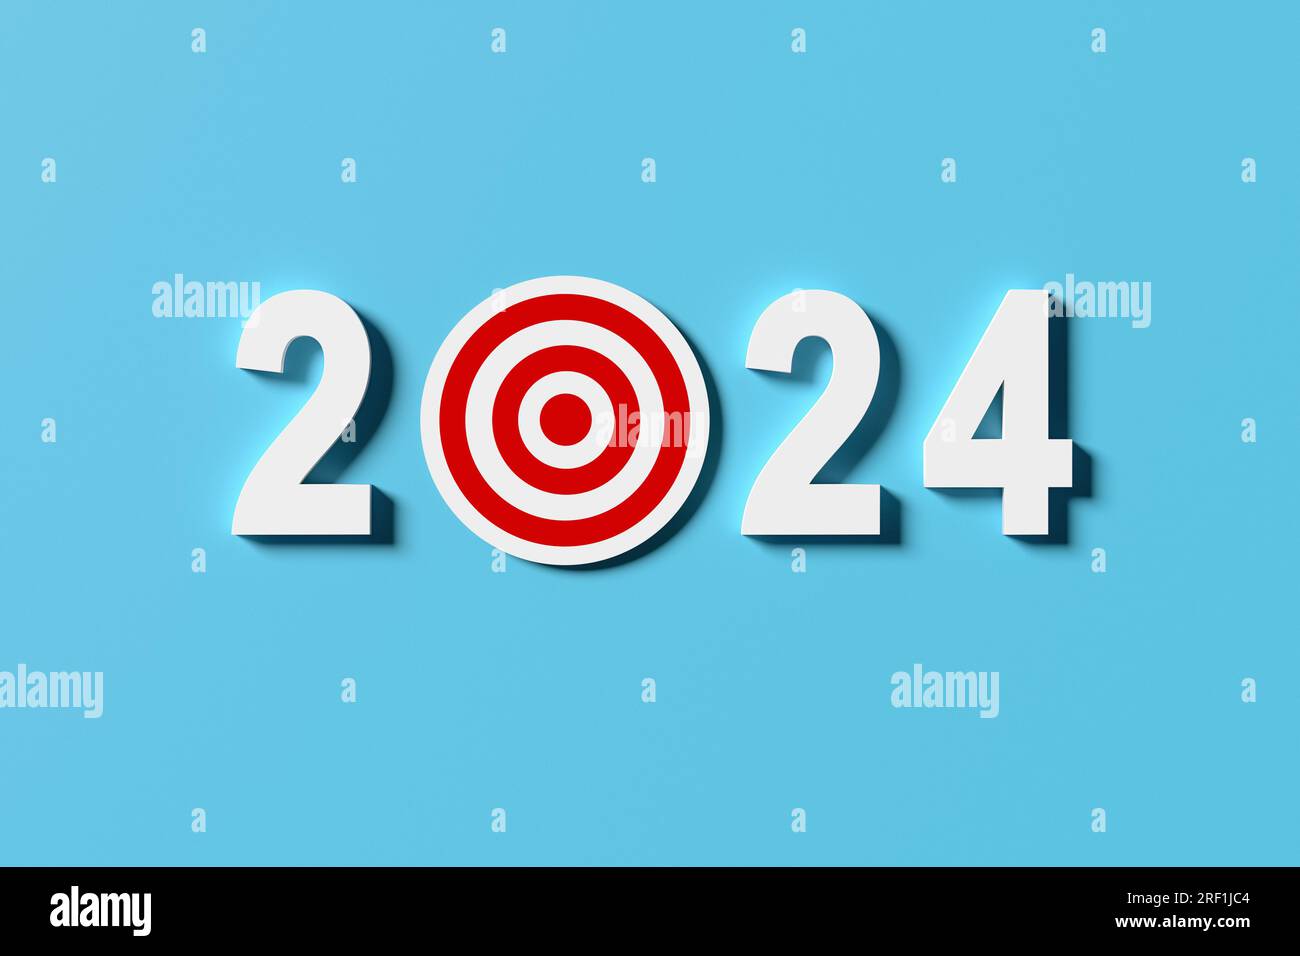 Planning business goals for the year 2024. Goal setting and achievement for the new year. Business common goals for planning new project, annual plan, Stock Photo